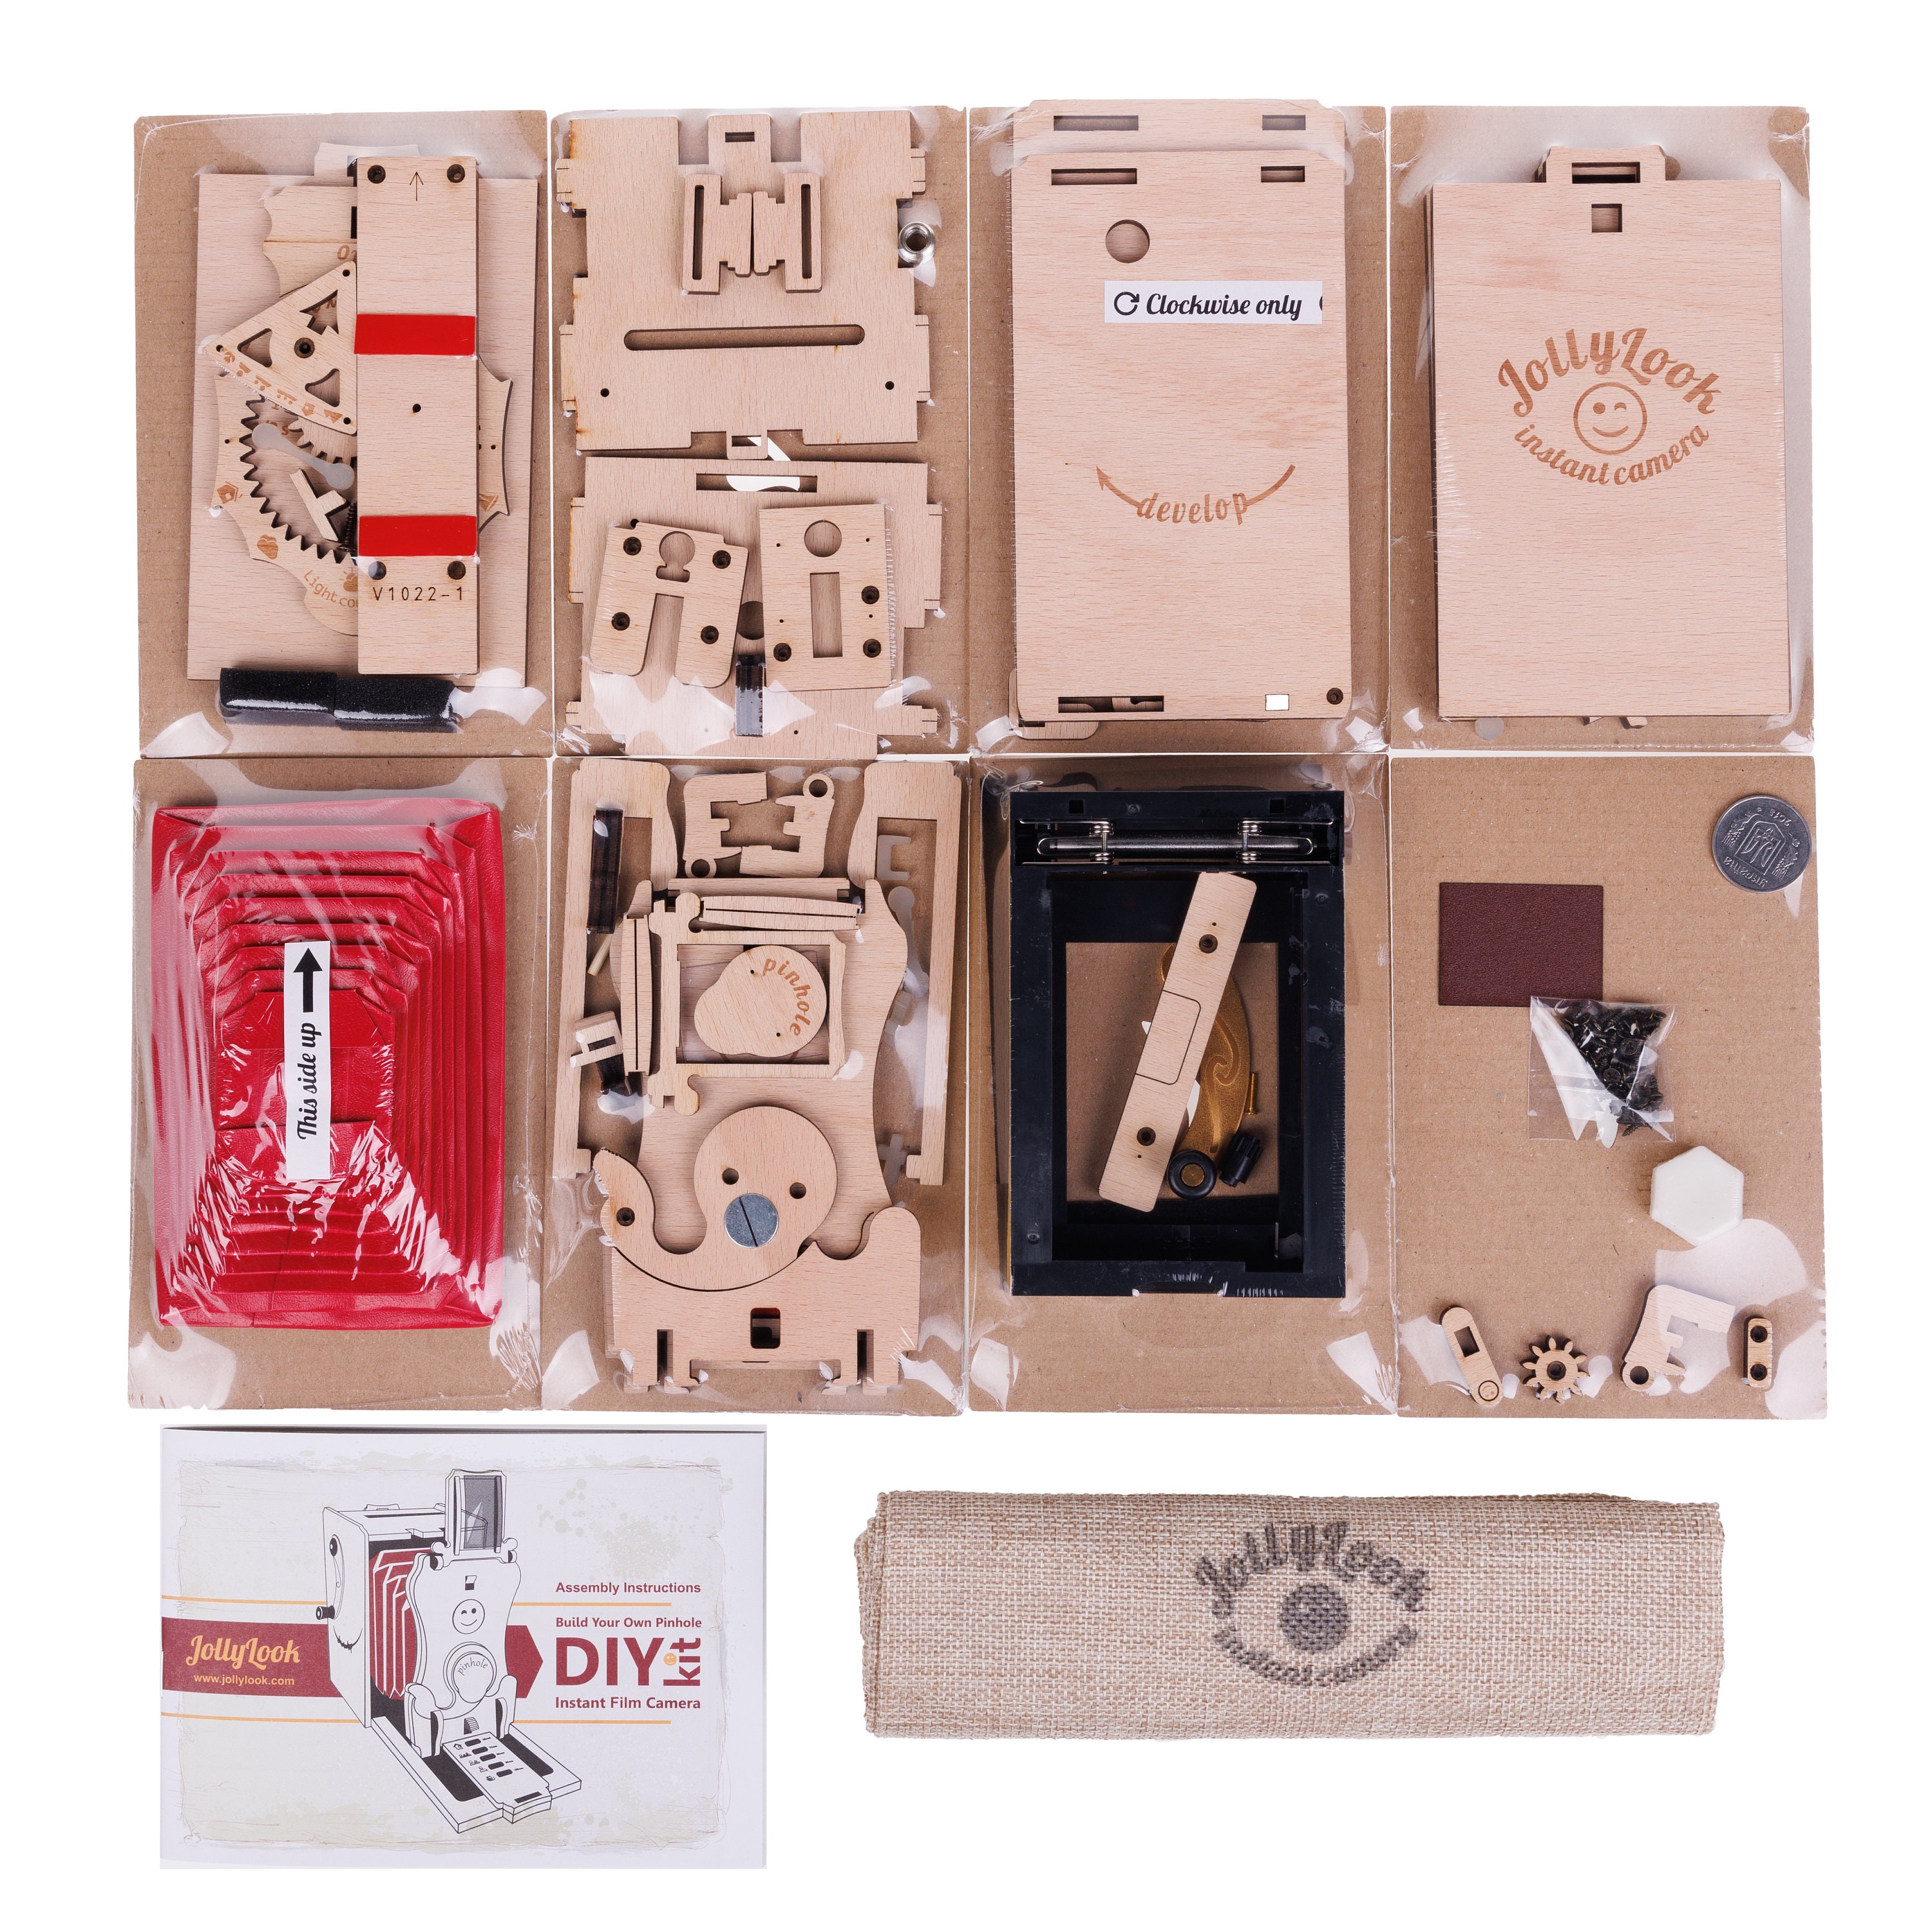 DIY Pinhole Camera Kit for Self-assembly and Painting